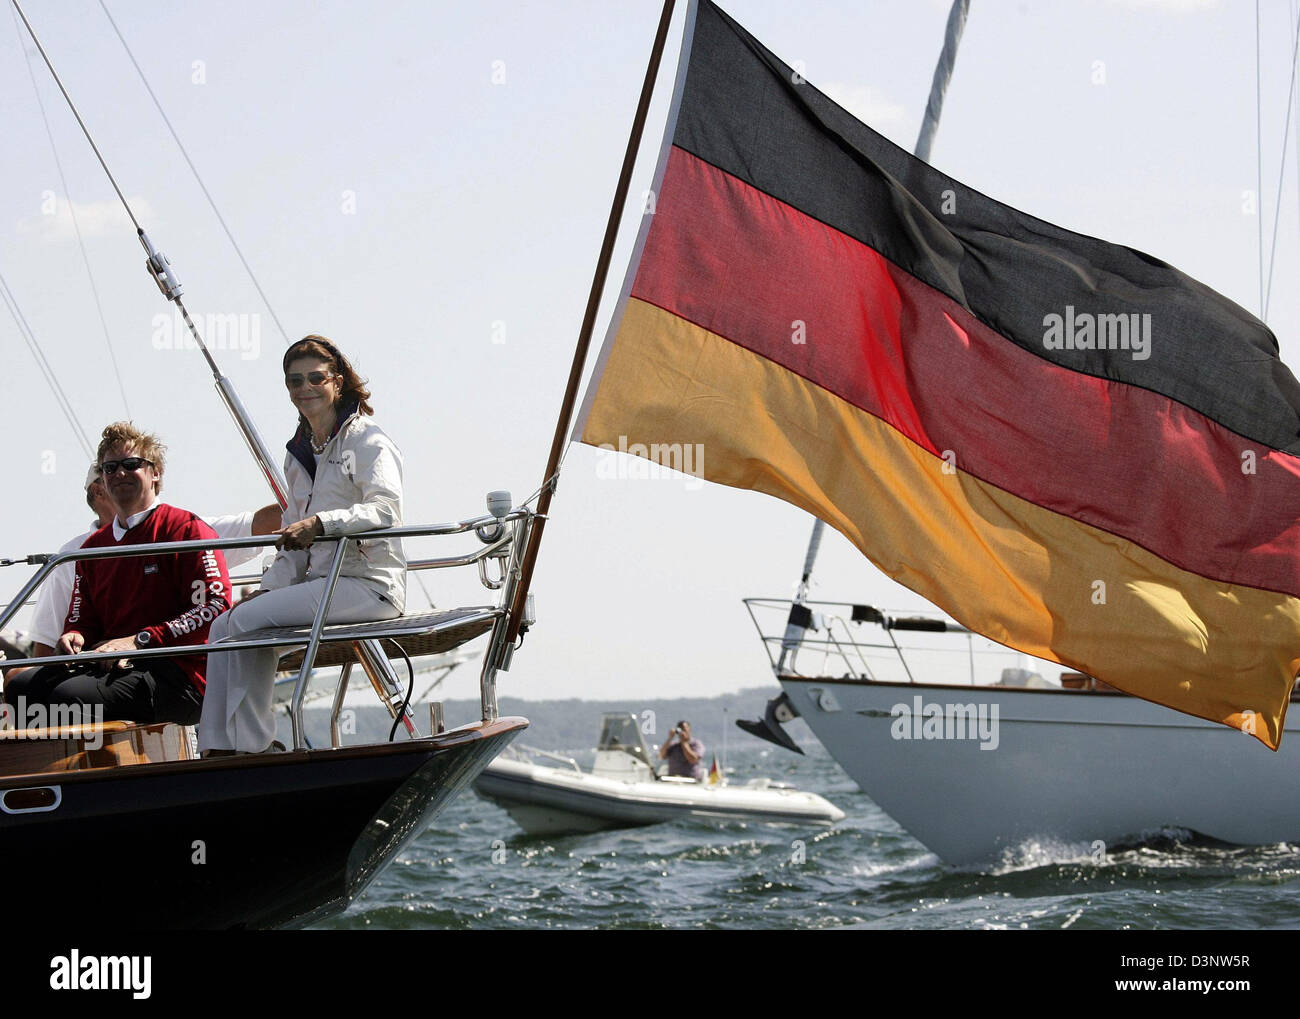 Queen Silvia of Sweden sits next to Alexander Prince of Schleswig-Holstein and a German Flag on the yacht 'Marantha' in Strande near Kiel, Germany, Monday, 3 July 2006. The monarch with German origin gave the start signal for the 'Childhood Charity Race' at the 'Kieler Foerde'. The proceeds will be donated to the 'Childhood Foundation' which Silvia founded. It helps impoverished ch Stock Photo